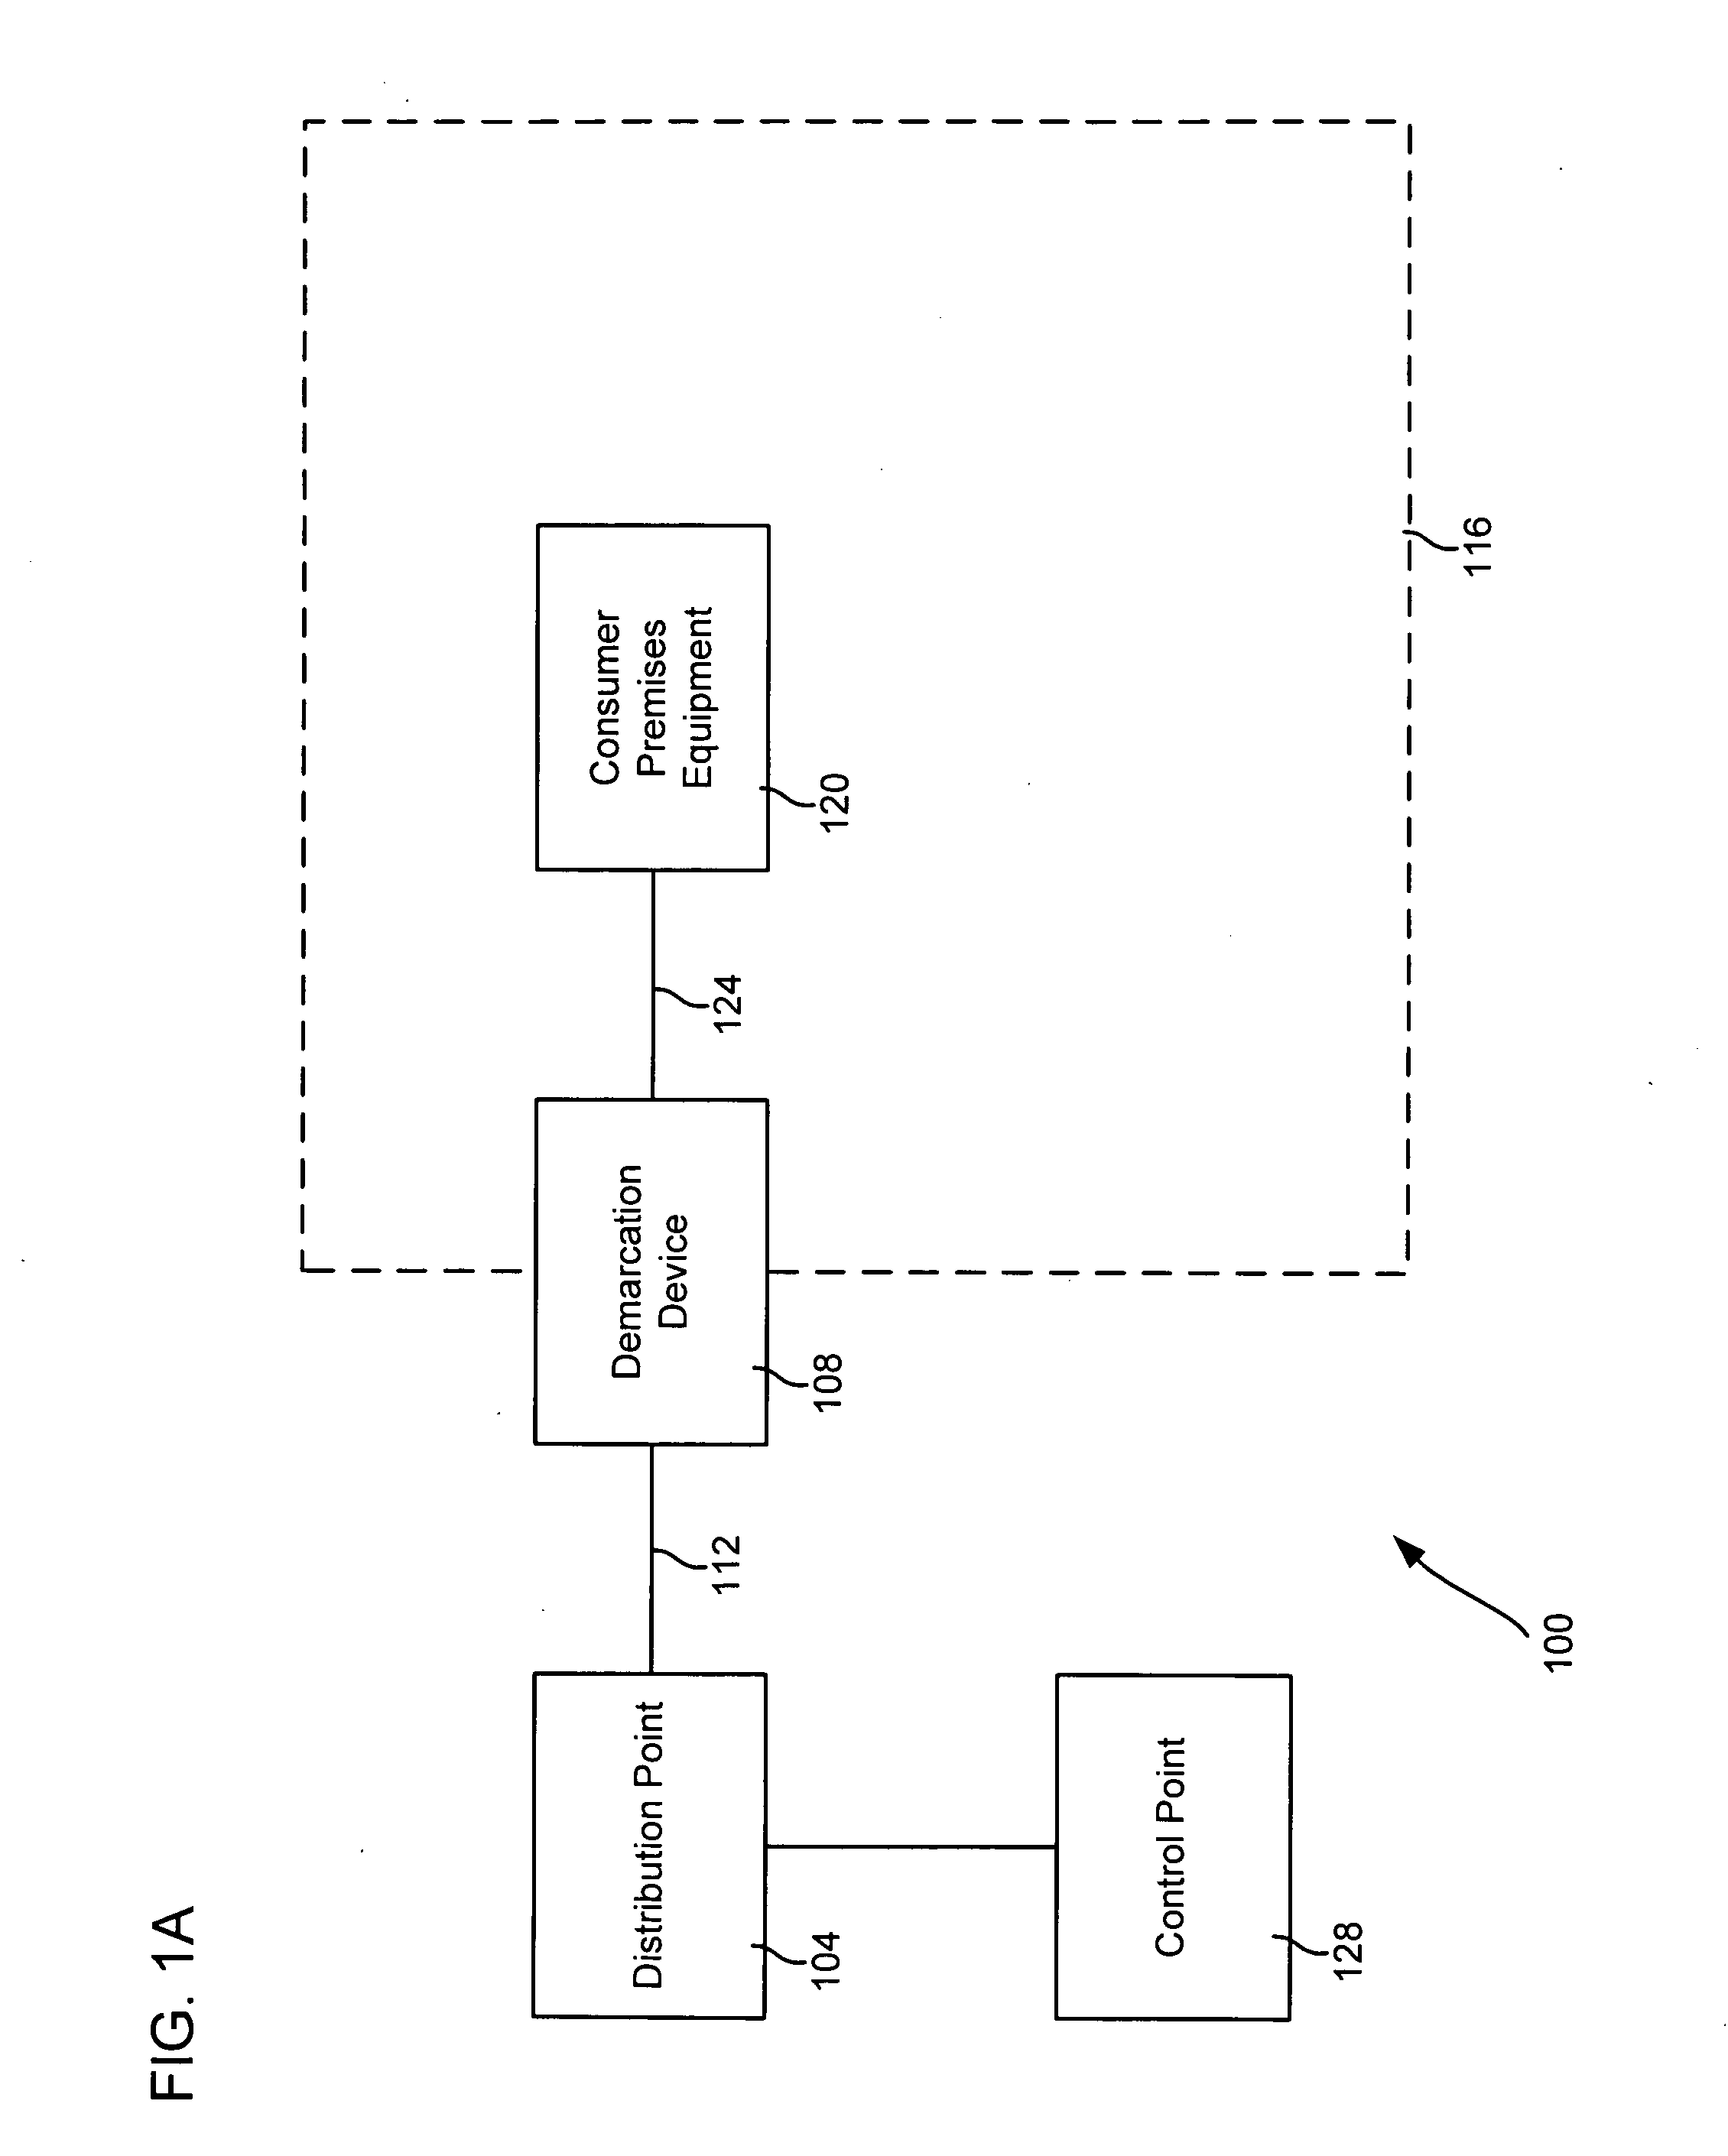 Environmentally-controlled network interface device and methods